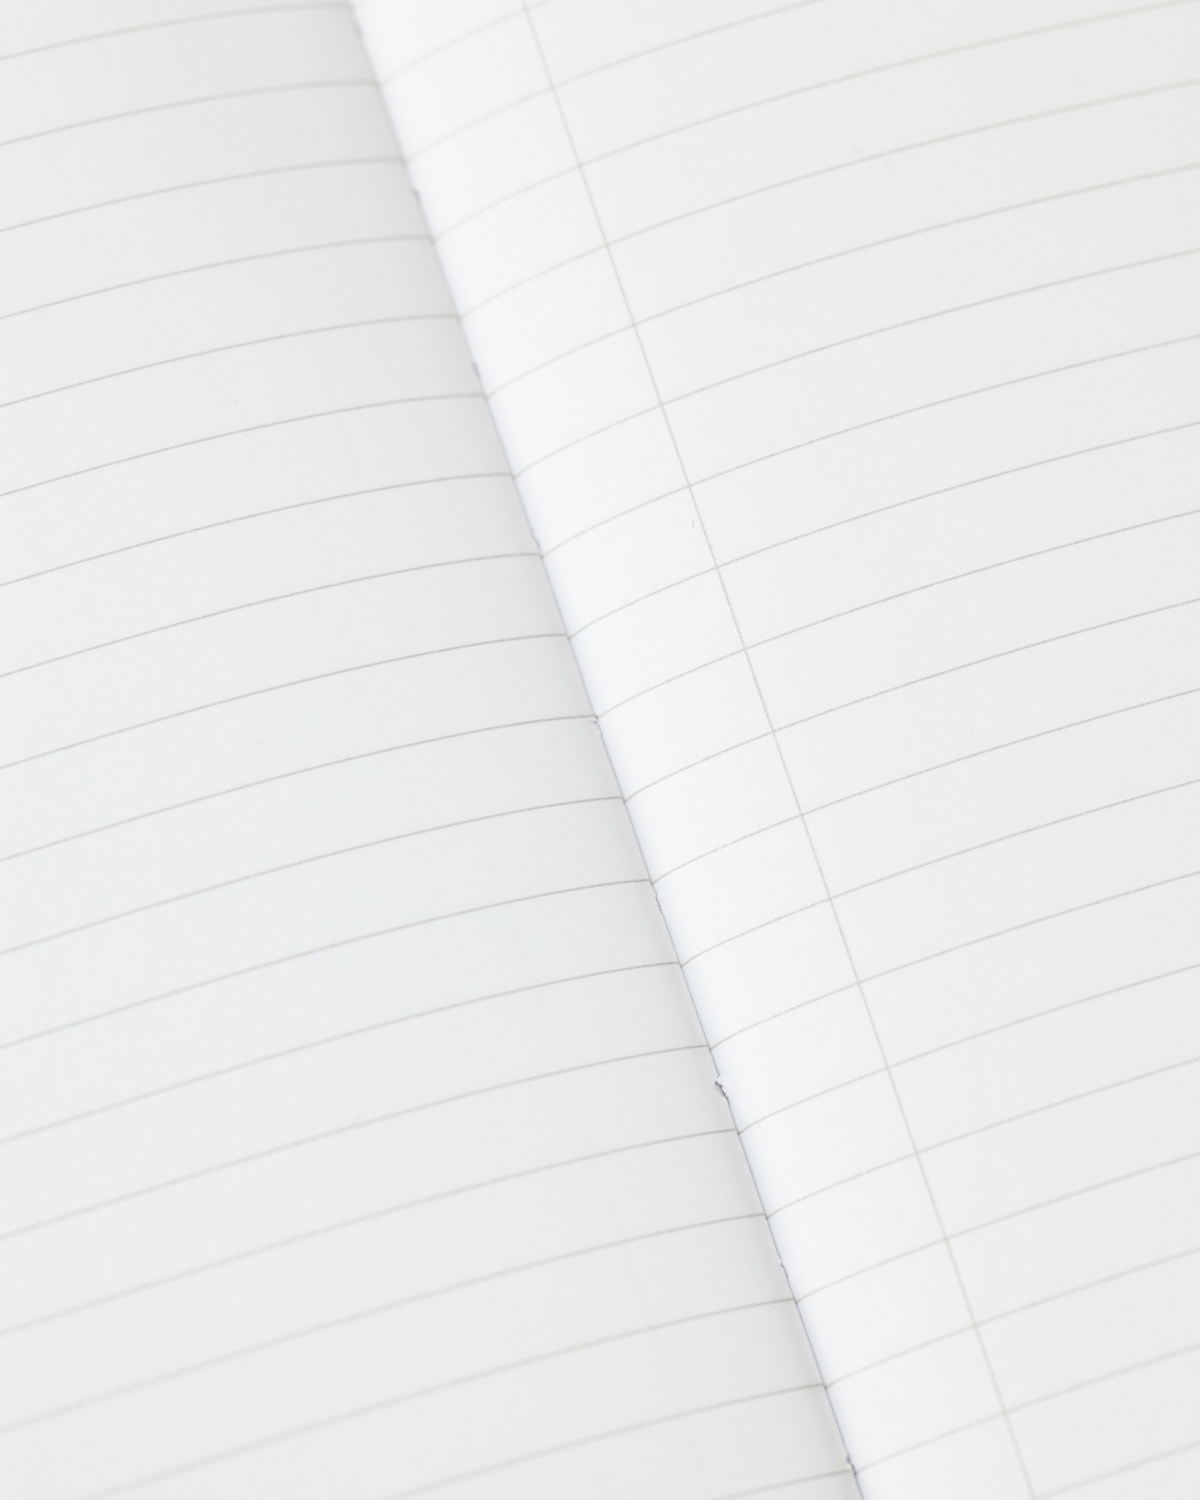 8mm Squared Paper With Black Lines